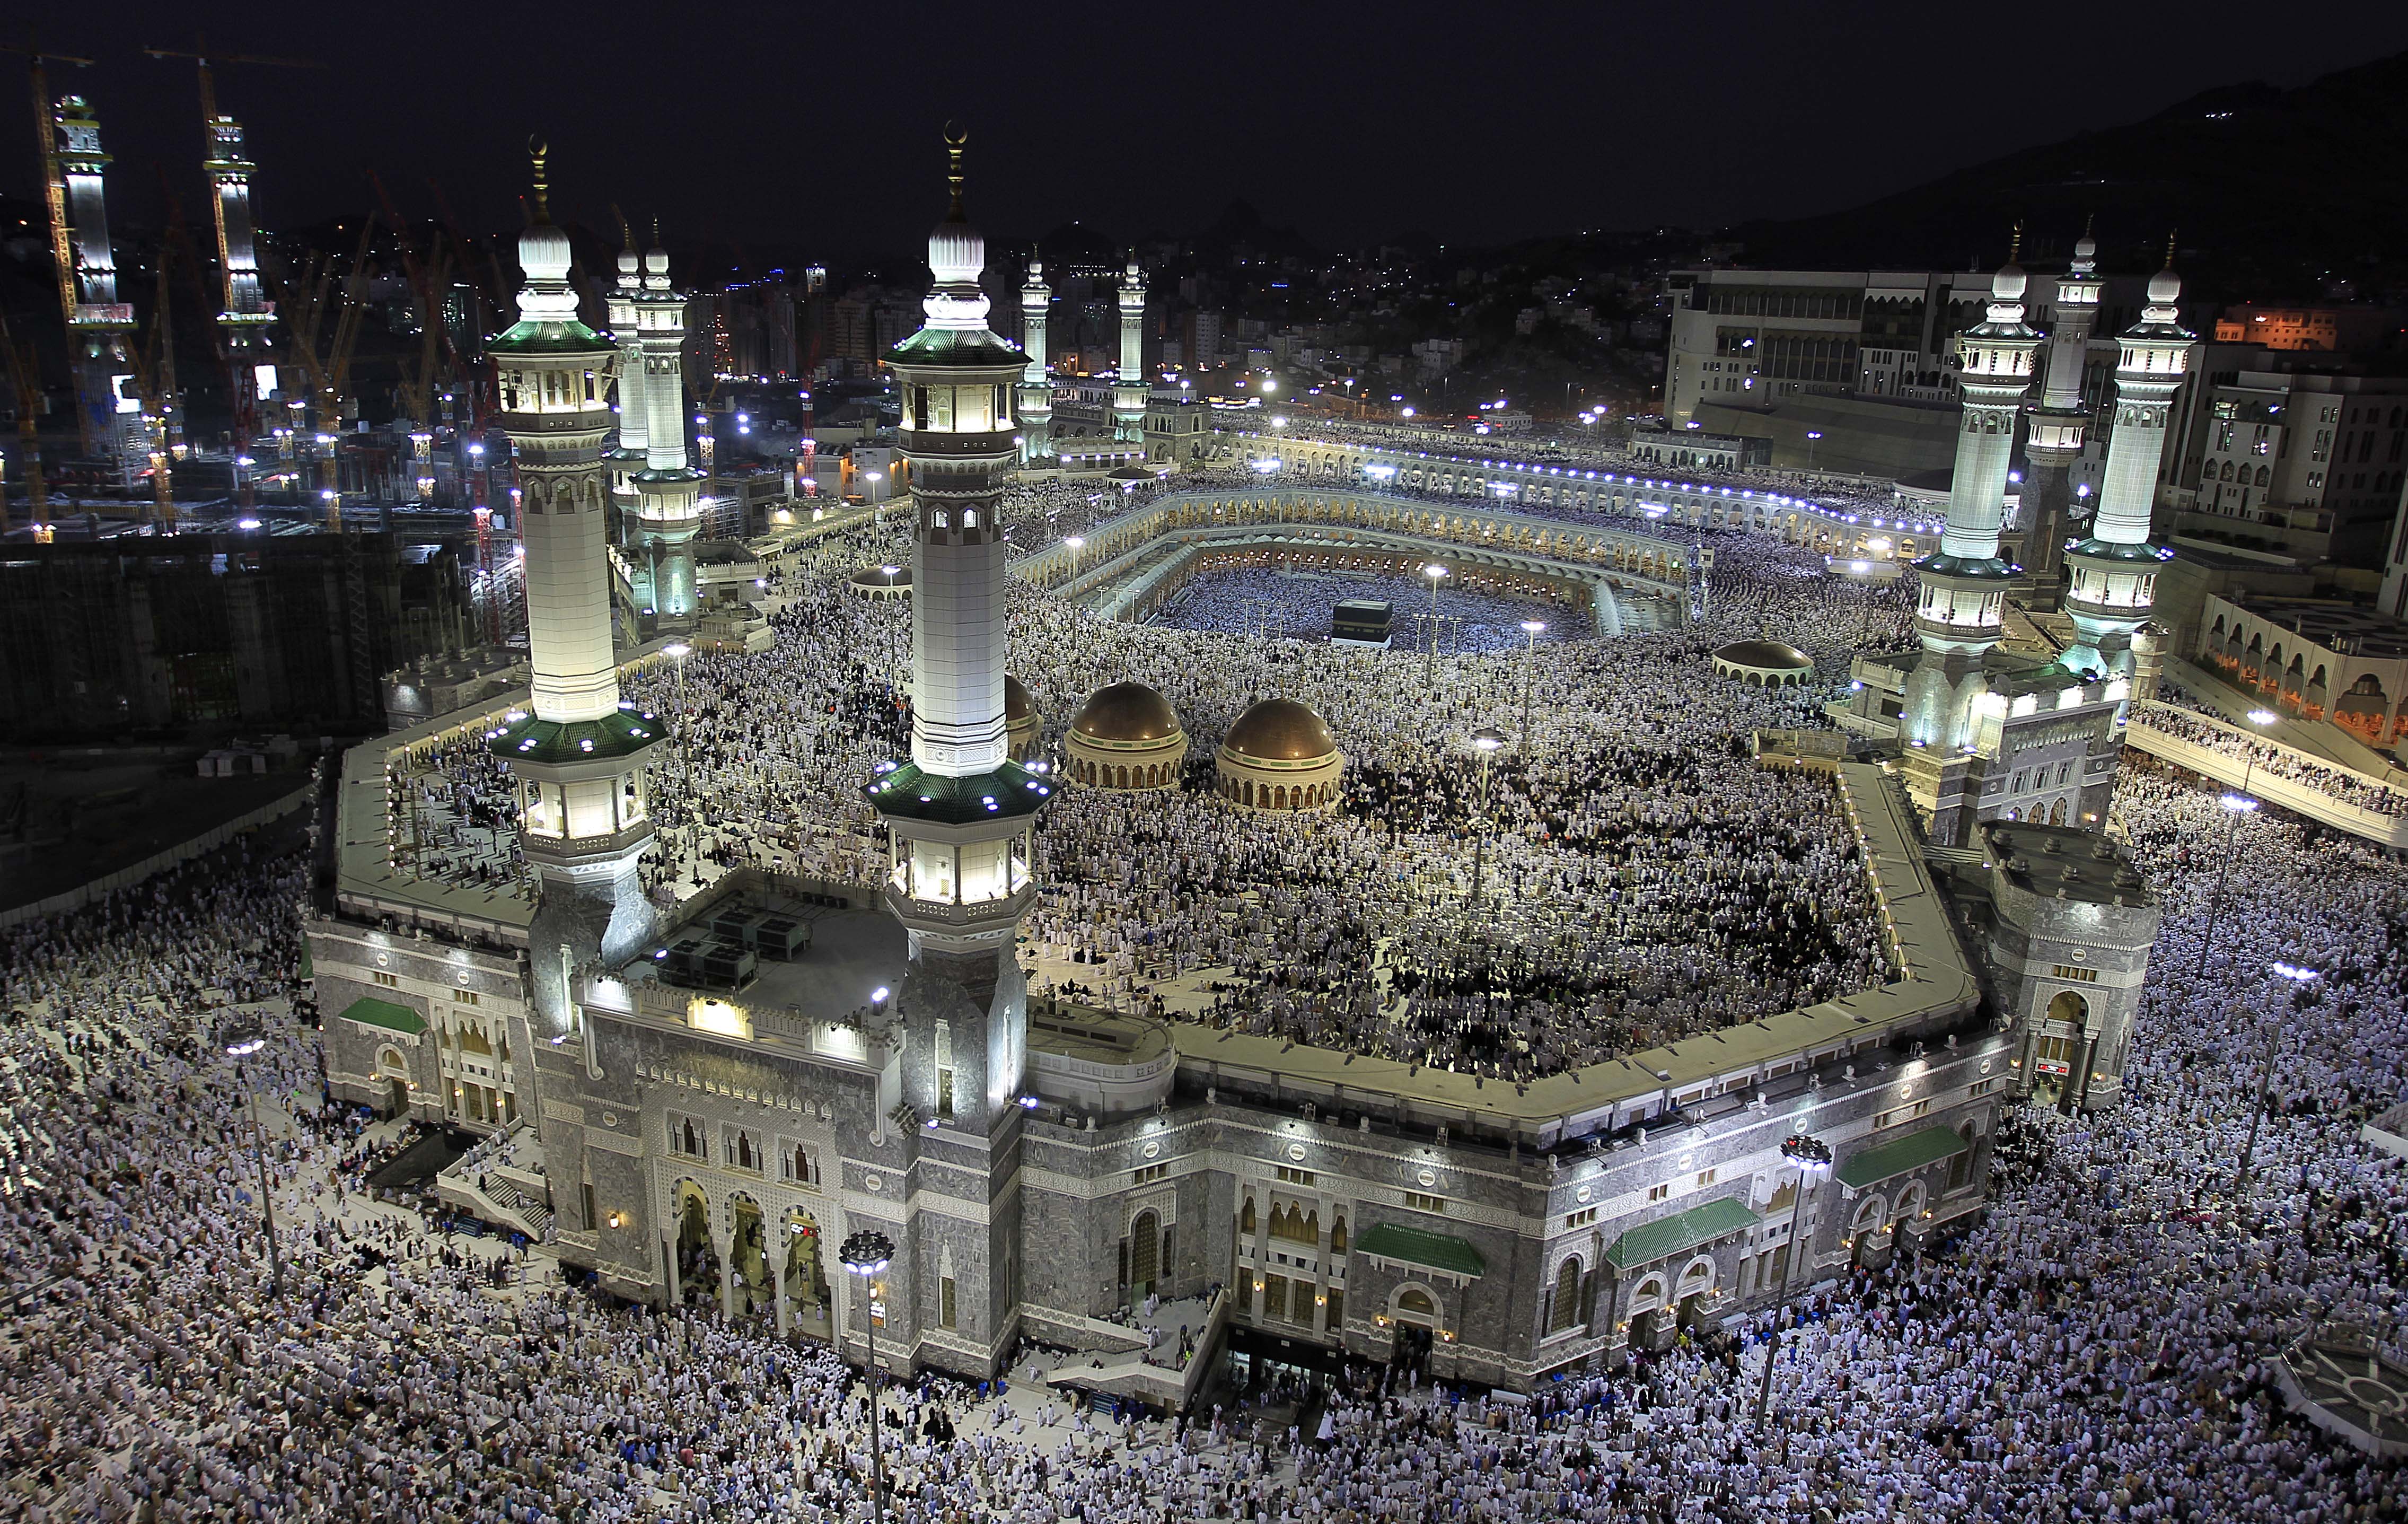 Tens of thousands of Muslim pilgrims move around the Kaaba, seen at center, inside the Grand Mosque, in Mecca, Saudi Arabia, Thursday, Nov. 3, 2011. The annual Islamic pilgrimage draws three million visitors each year, making it the largest yearly gathering of people in the world. The Hajj will begin on November 5. (AP Photo/Hassan Ammar)